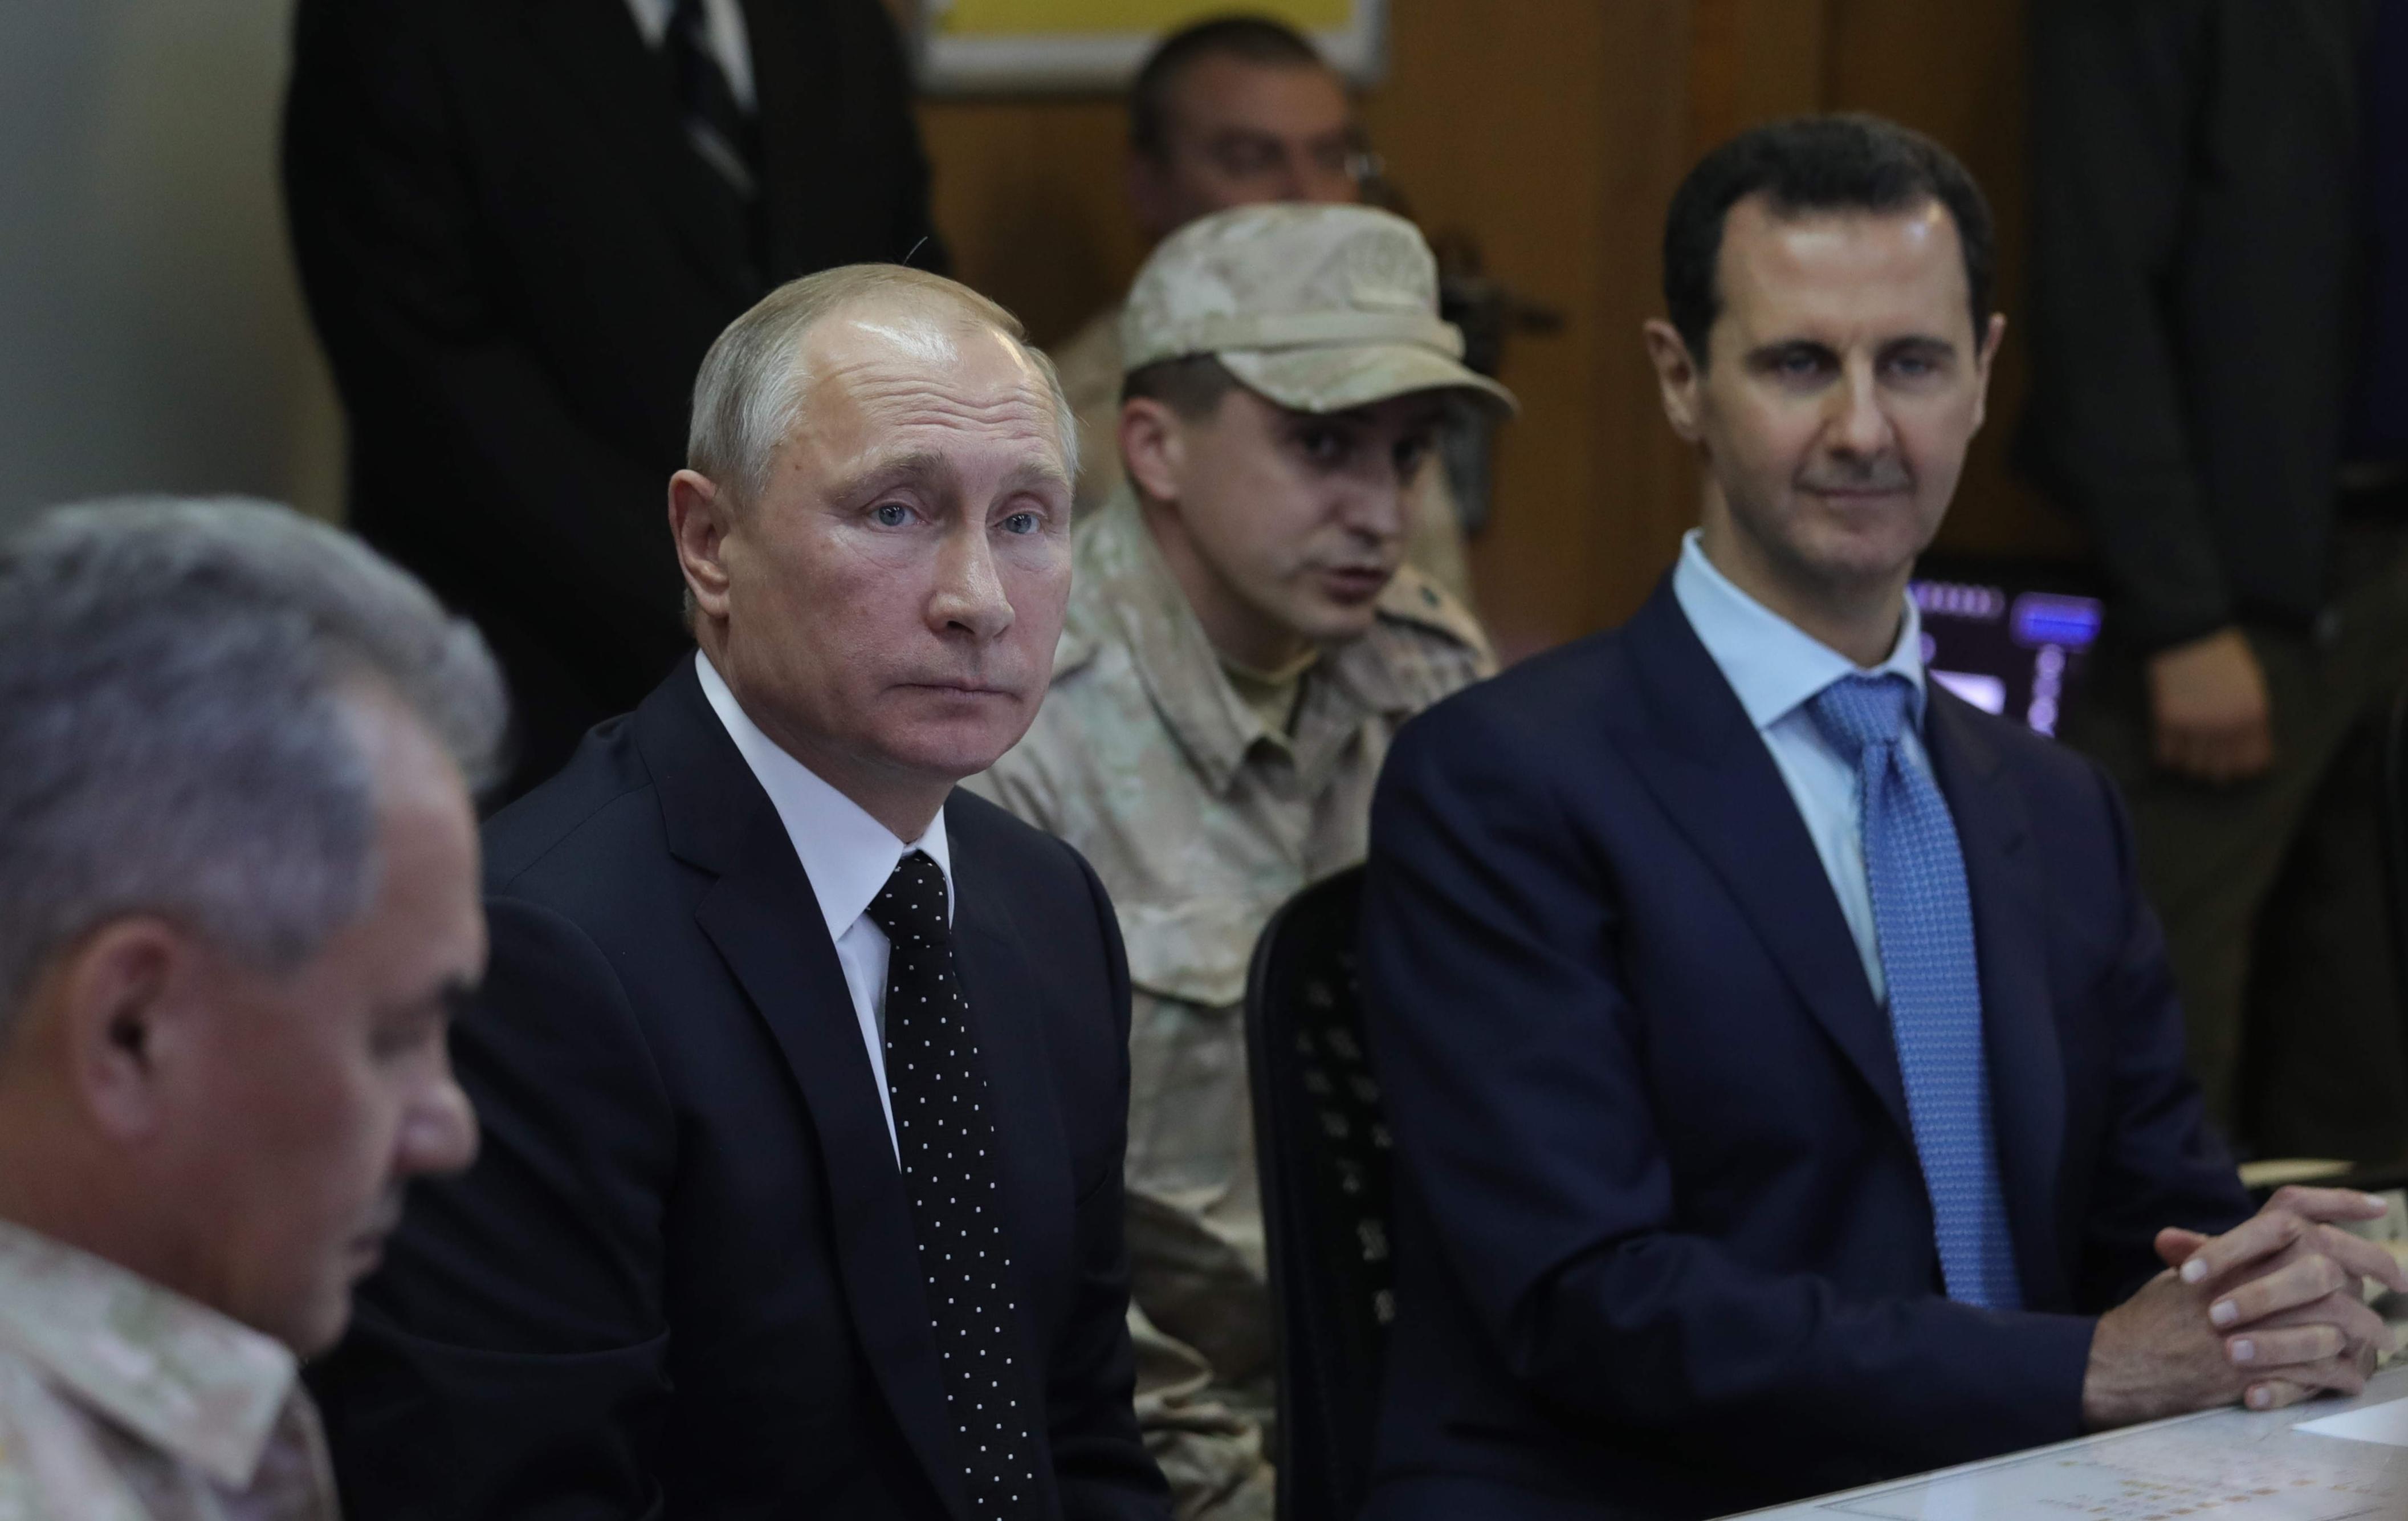 Vladimir Putin In Syria To Declare Victory Hug Bashar Assad And Announce Partial Russia Troops 7338